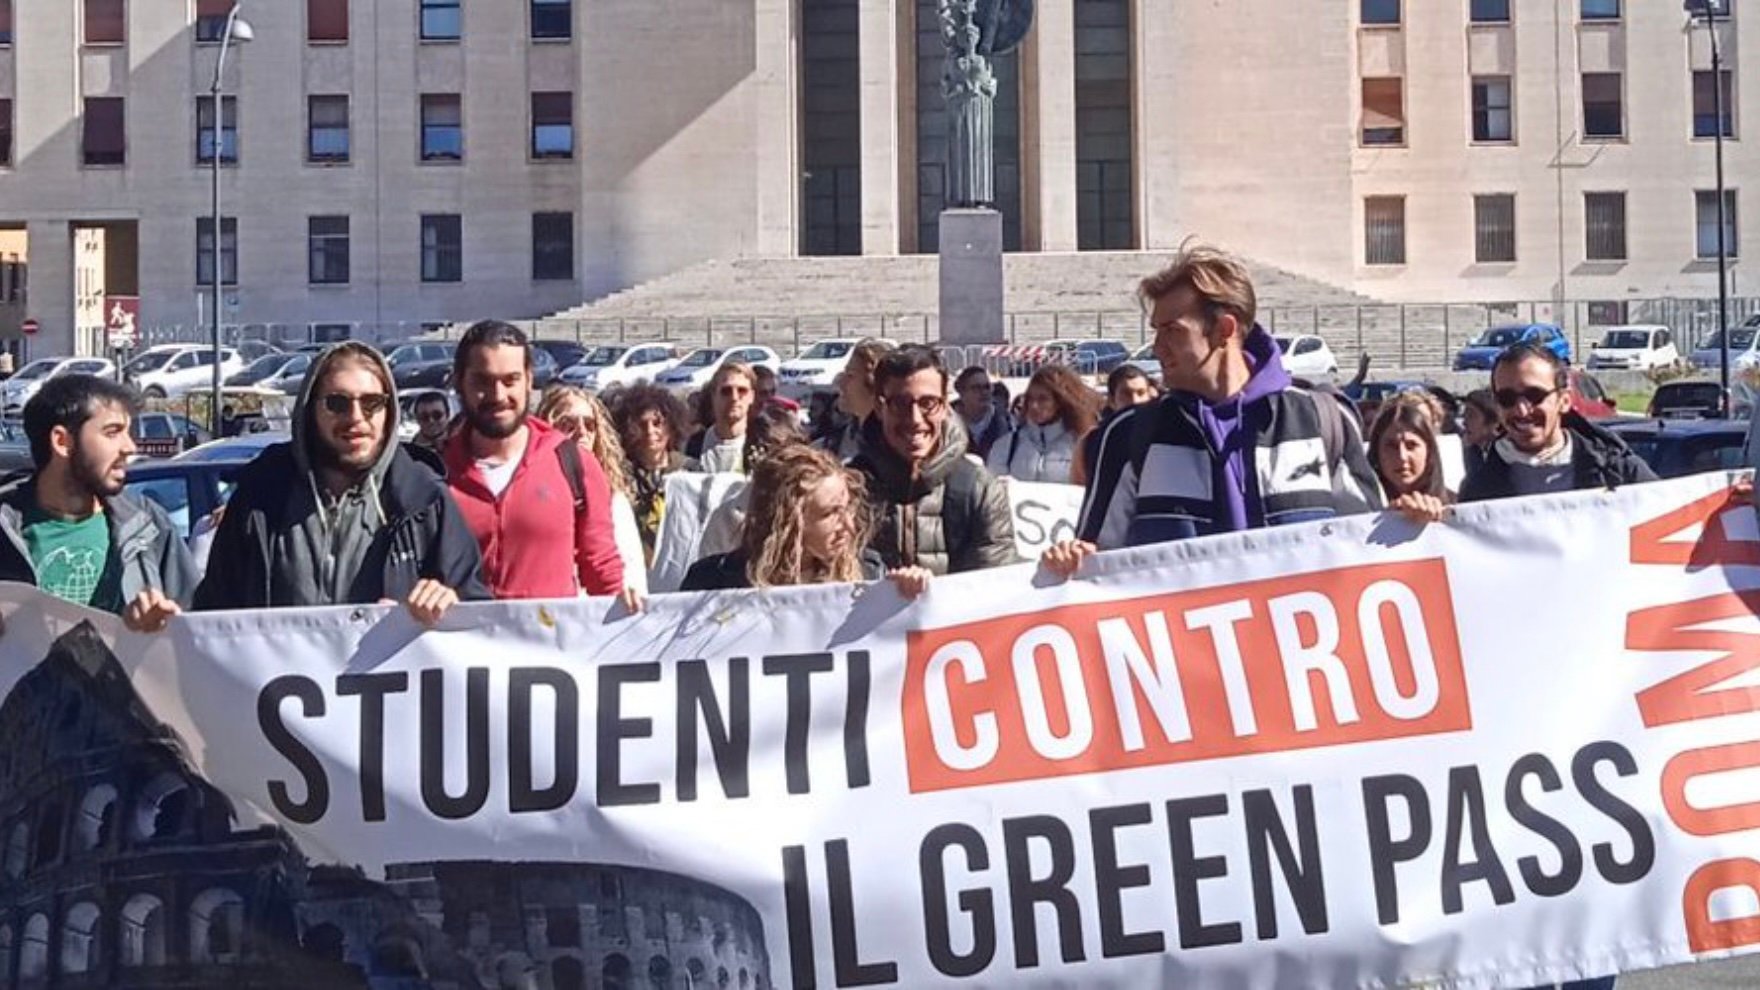  “Real Science Doesn’t Force You to Believe, It Just Shows You” – Italian University Students Call Out for Help Against Vaccine Coercion and the Authoritarian Regime (VIDEO)